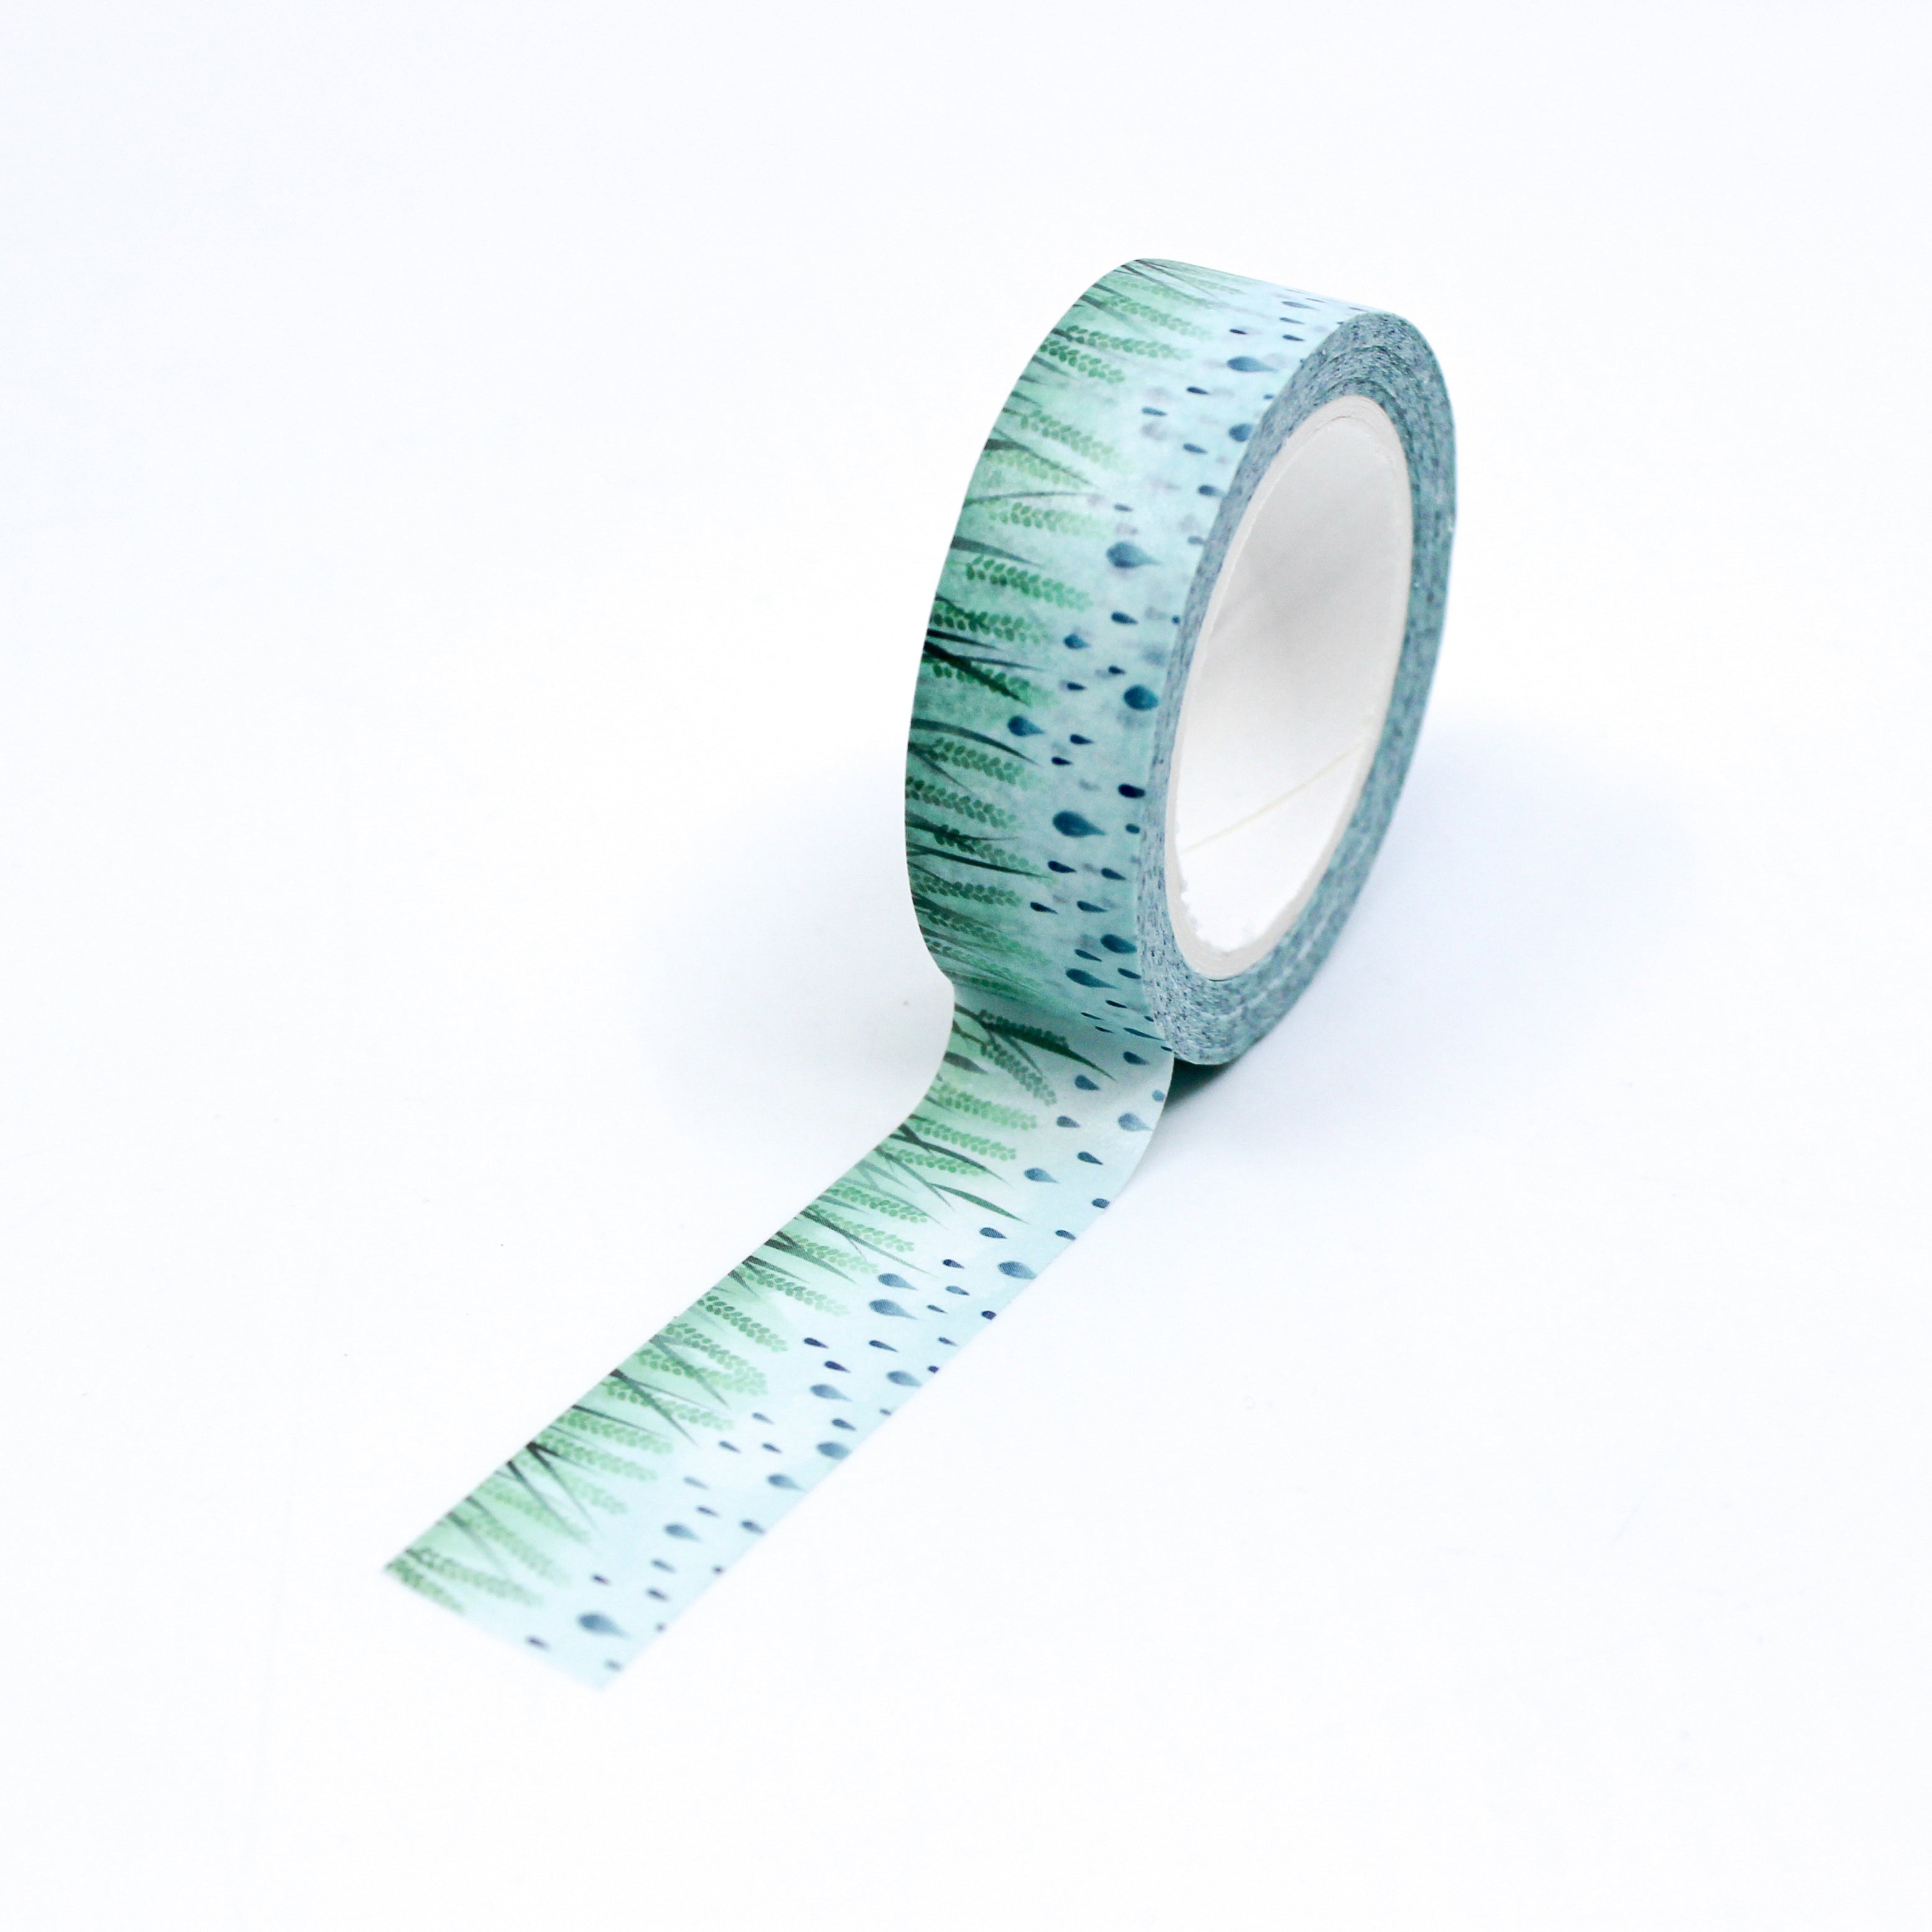 This a full pattern repeat view of sweet Nordic green grass washi tape from BBB Supplies Craft Shop